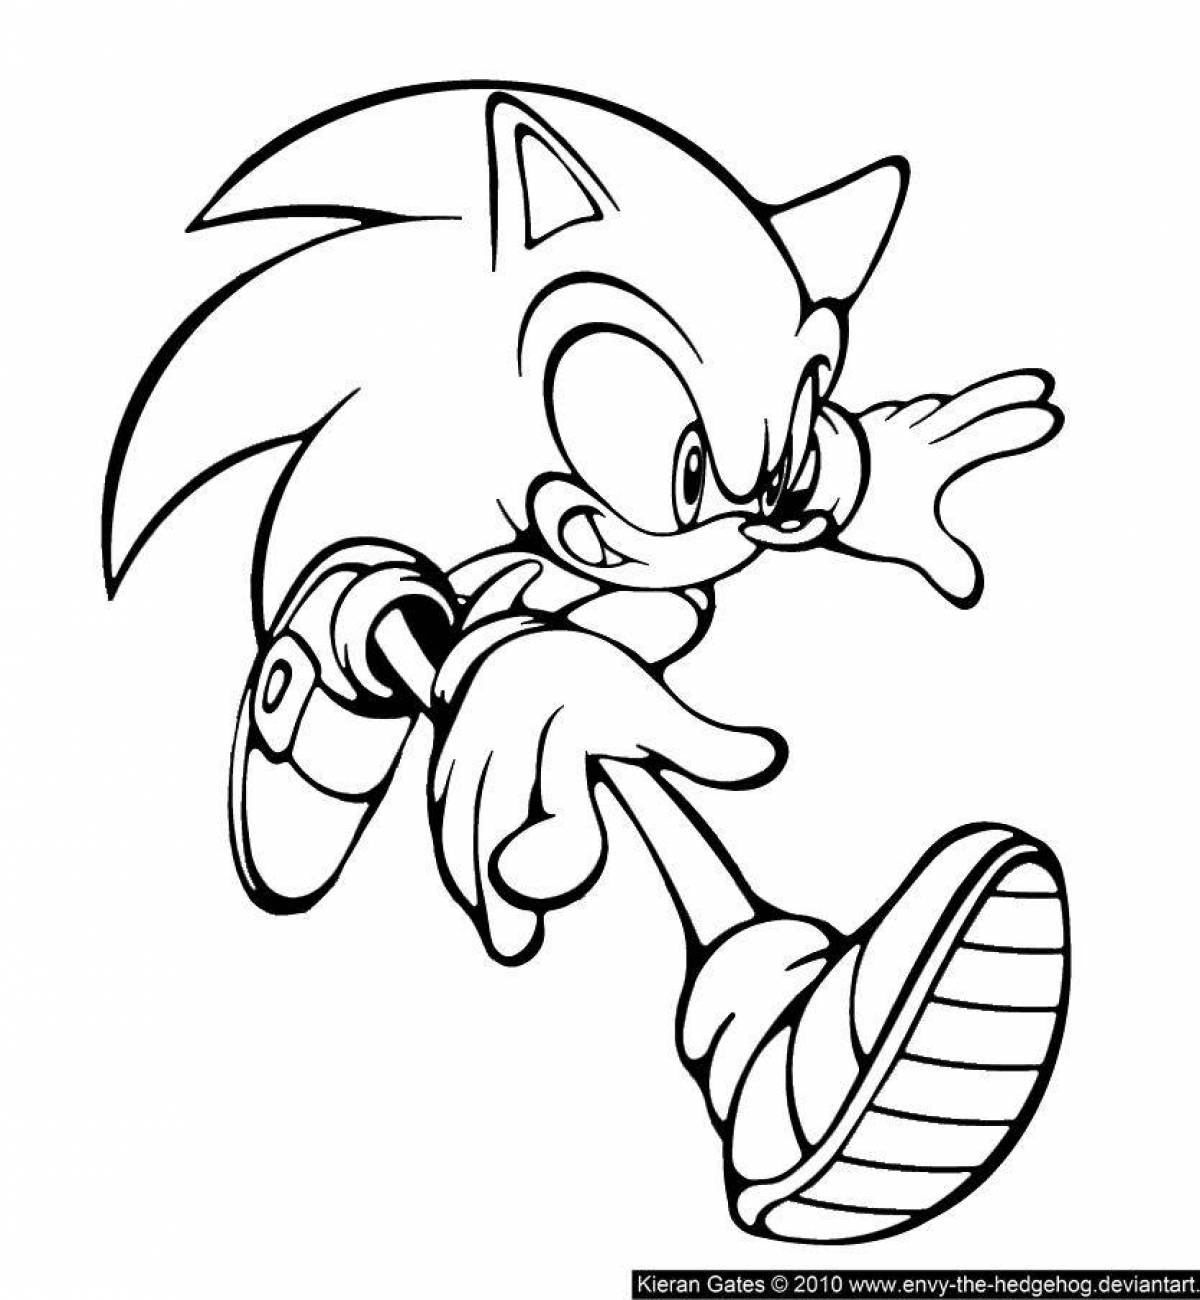 Exciting sonic hedgehog coloring book